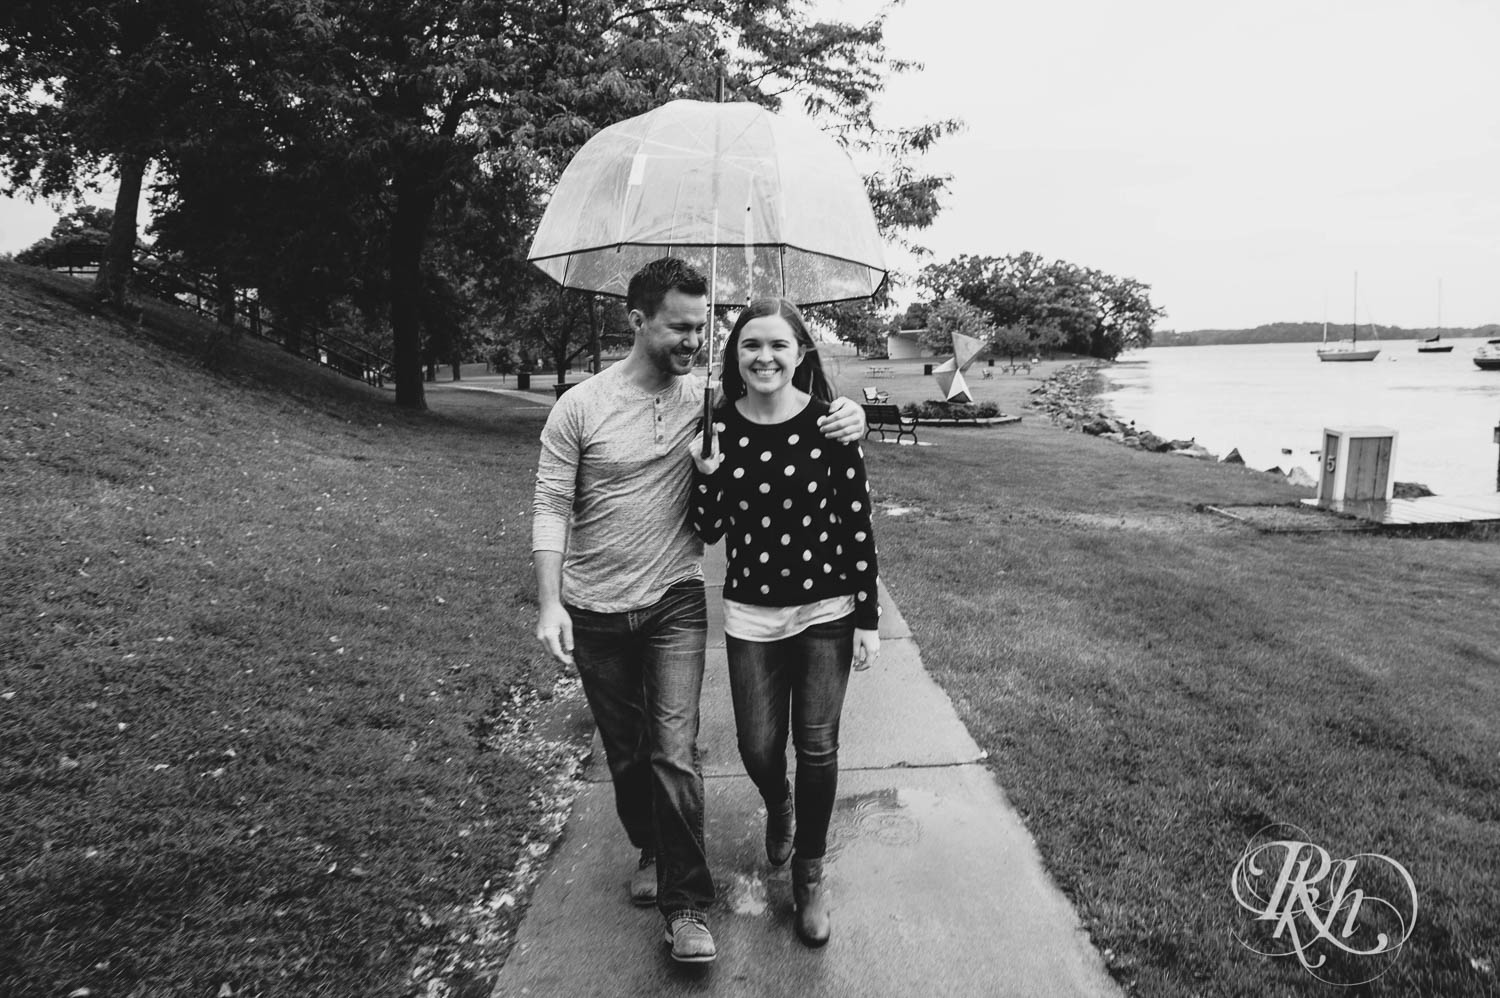 Man and woman laugh under umbrella during rainy day engagement photos in Excelsior, Minnesota.